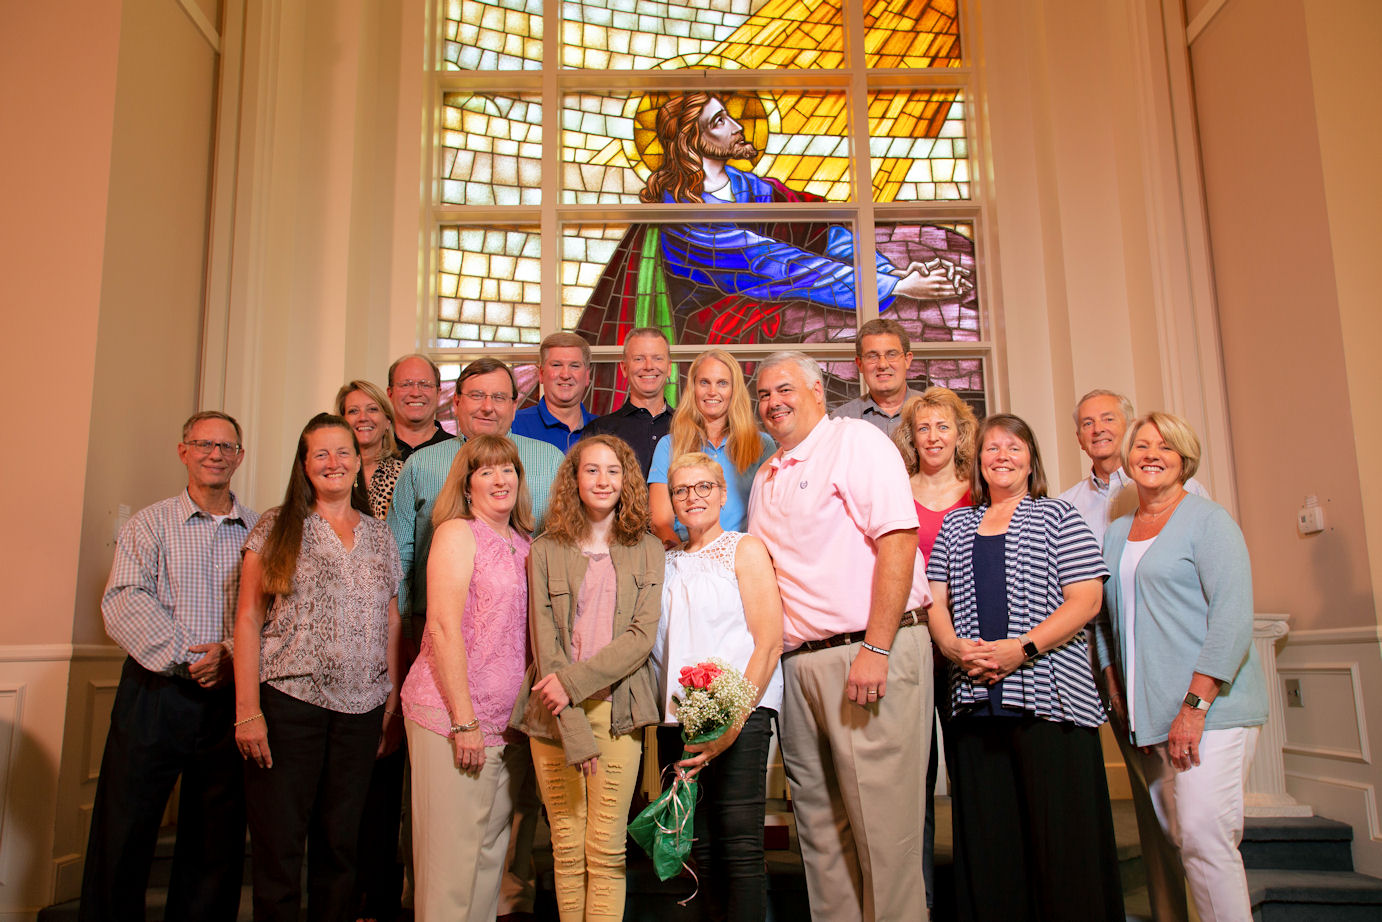 Large group of people surround Kimberly in front of stained glass window.